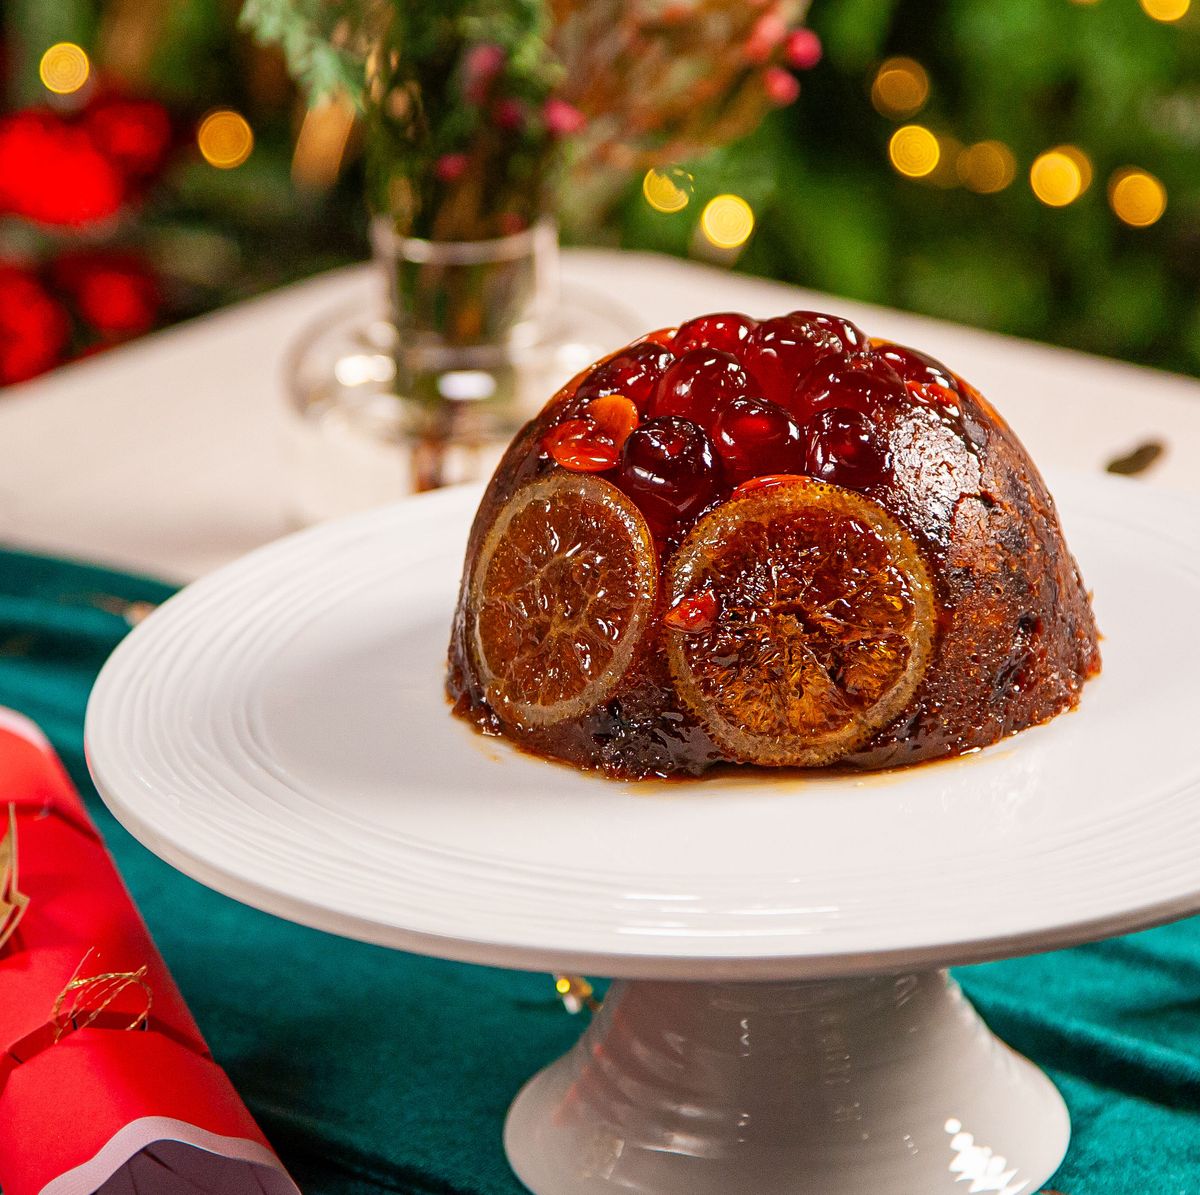 Best Christmas pudding for 2023